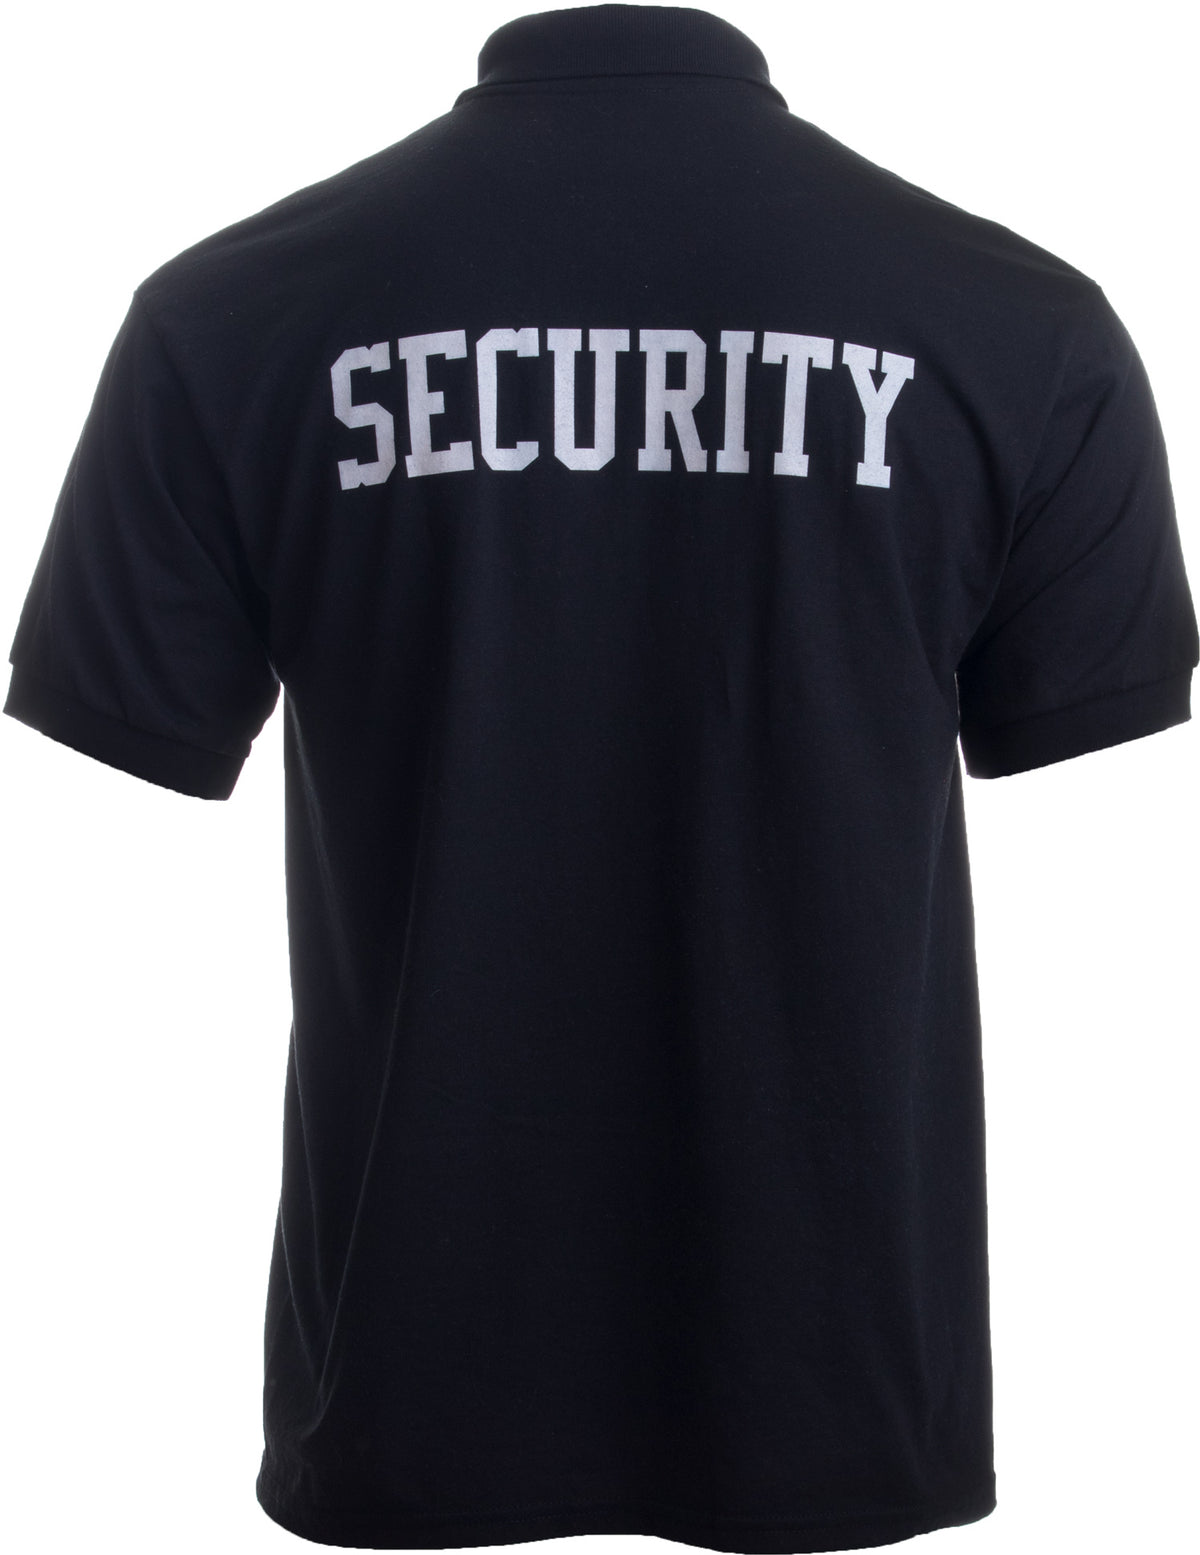 SECURITY | Professional Security Officer, Guard Unisex DryBlend Collared Shirt